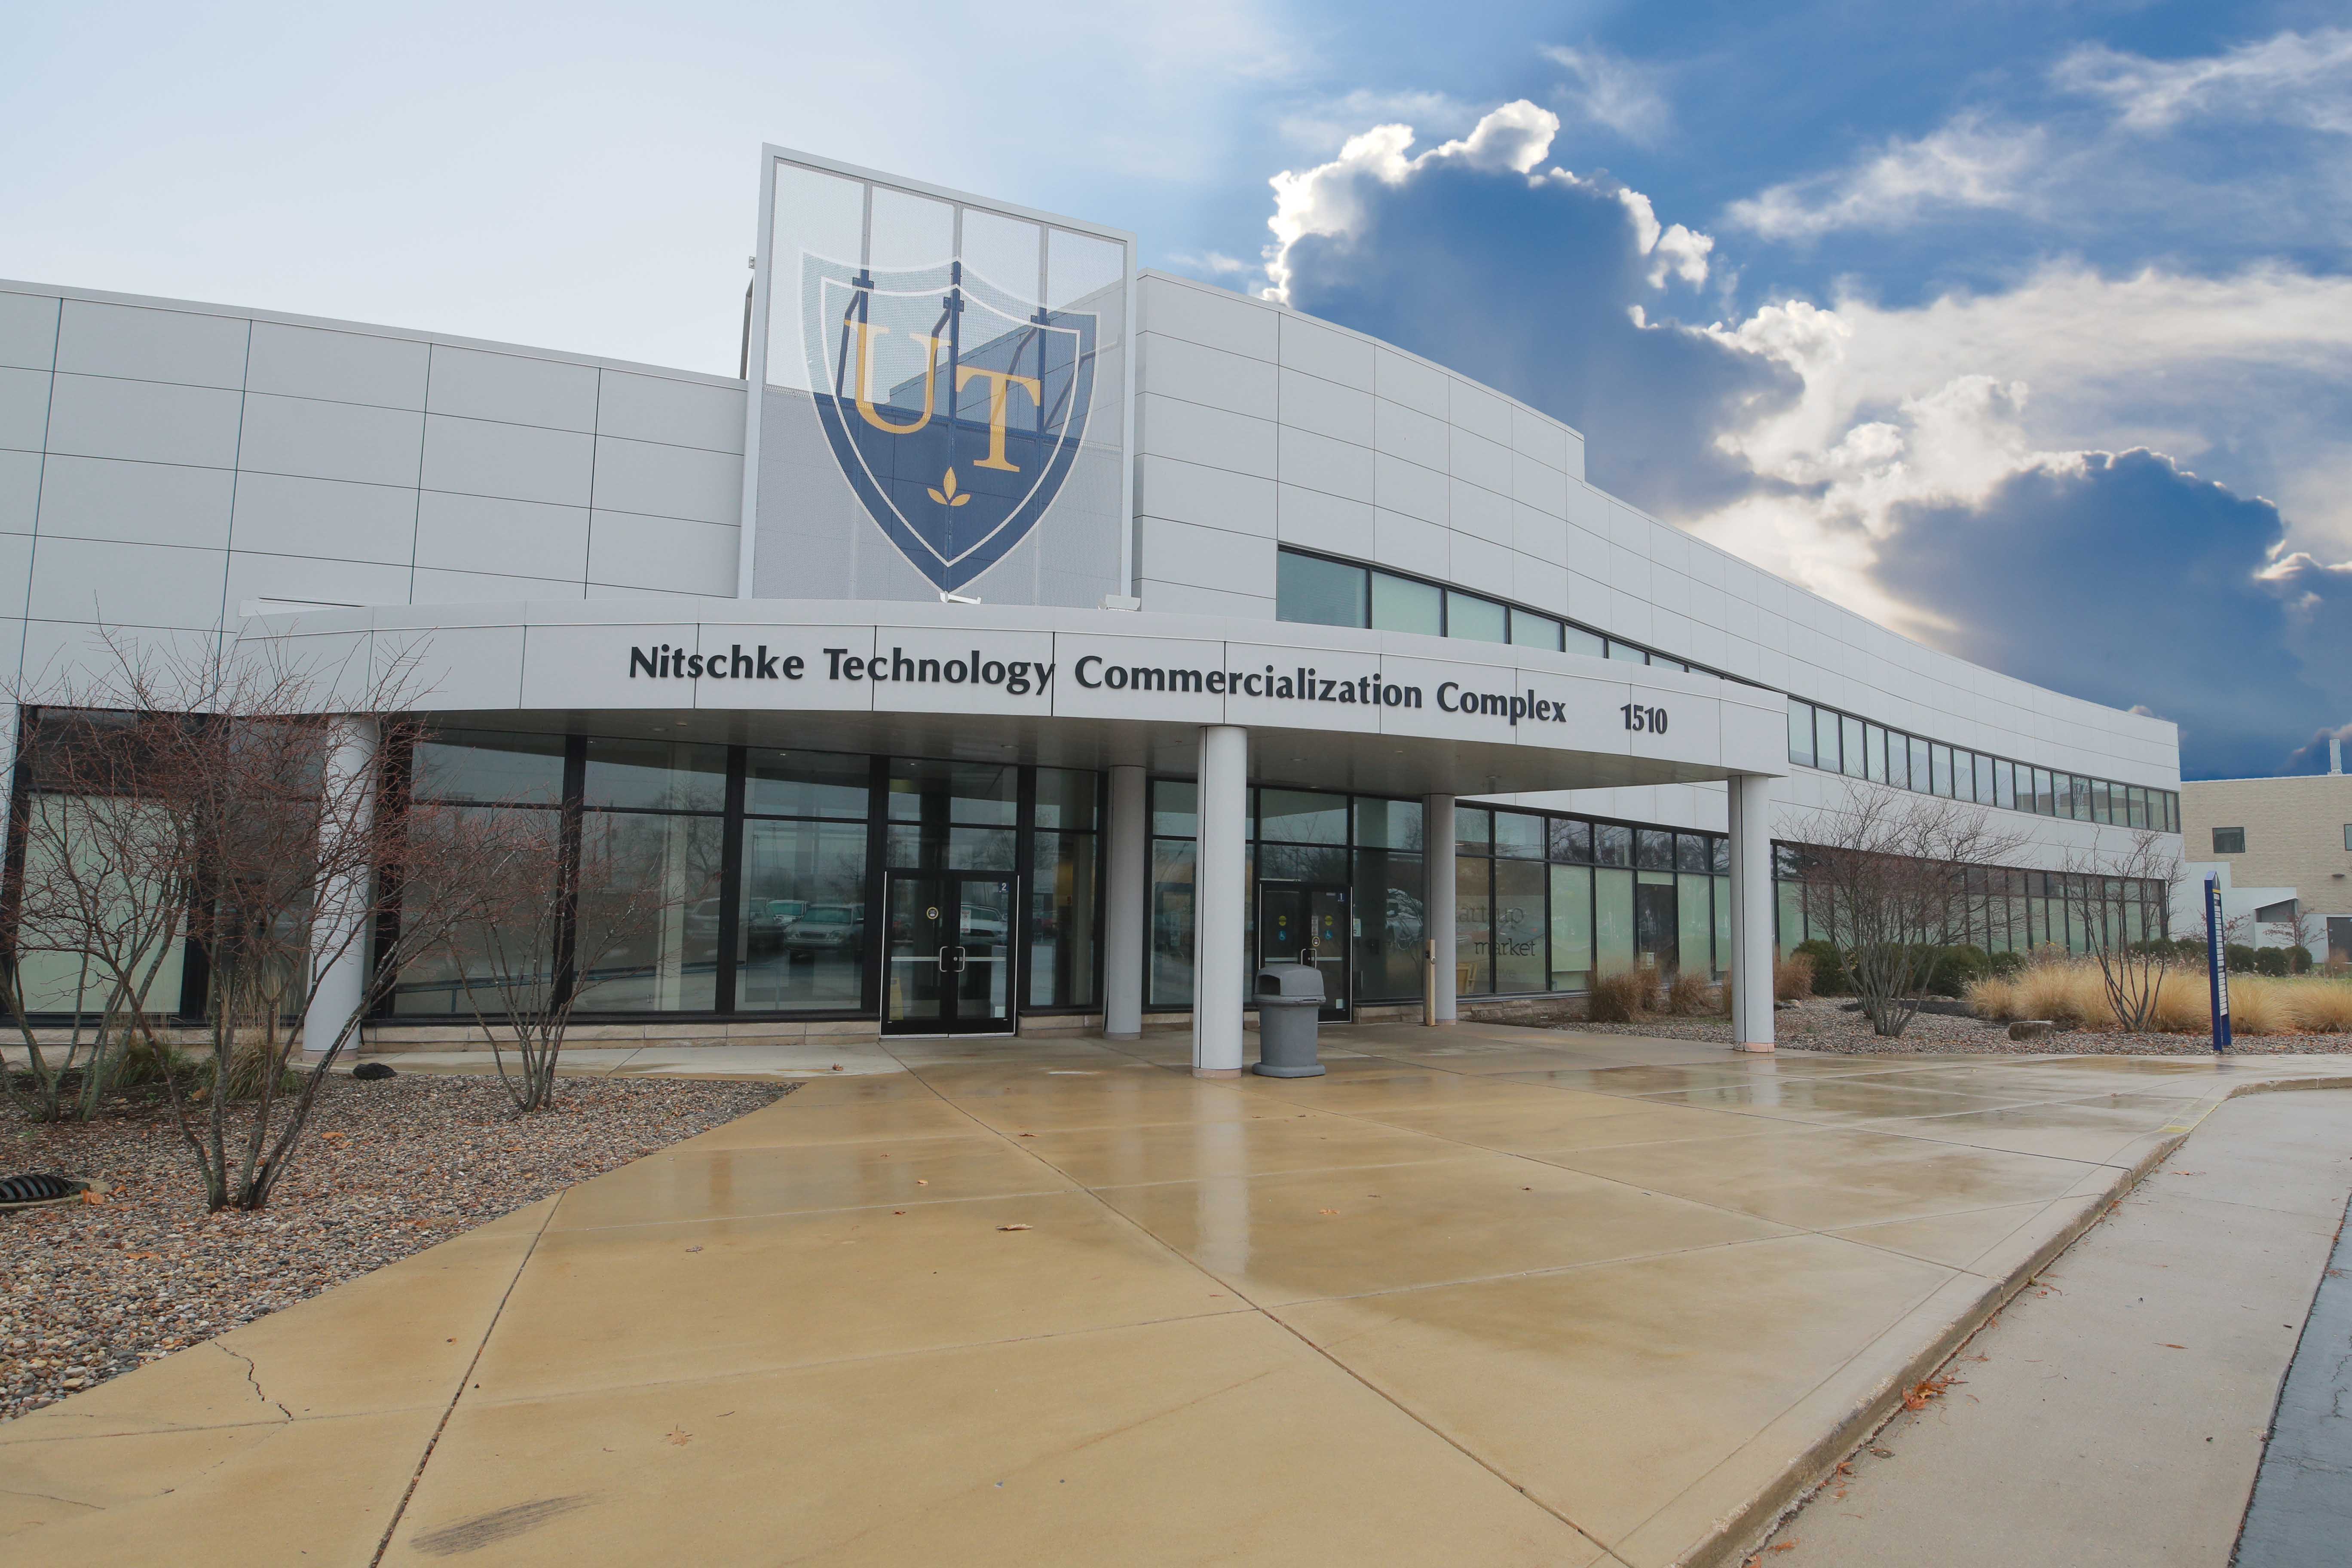 Photo of the entrance to the Nitschke Technology Commercialization Complex at The University of Toledo